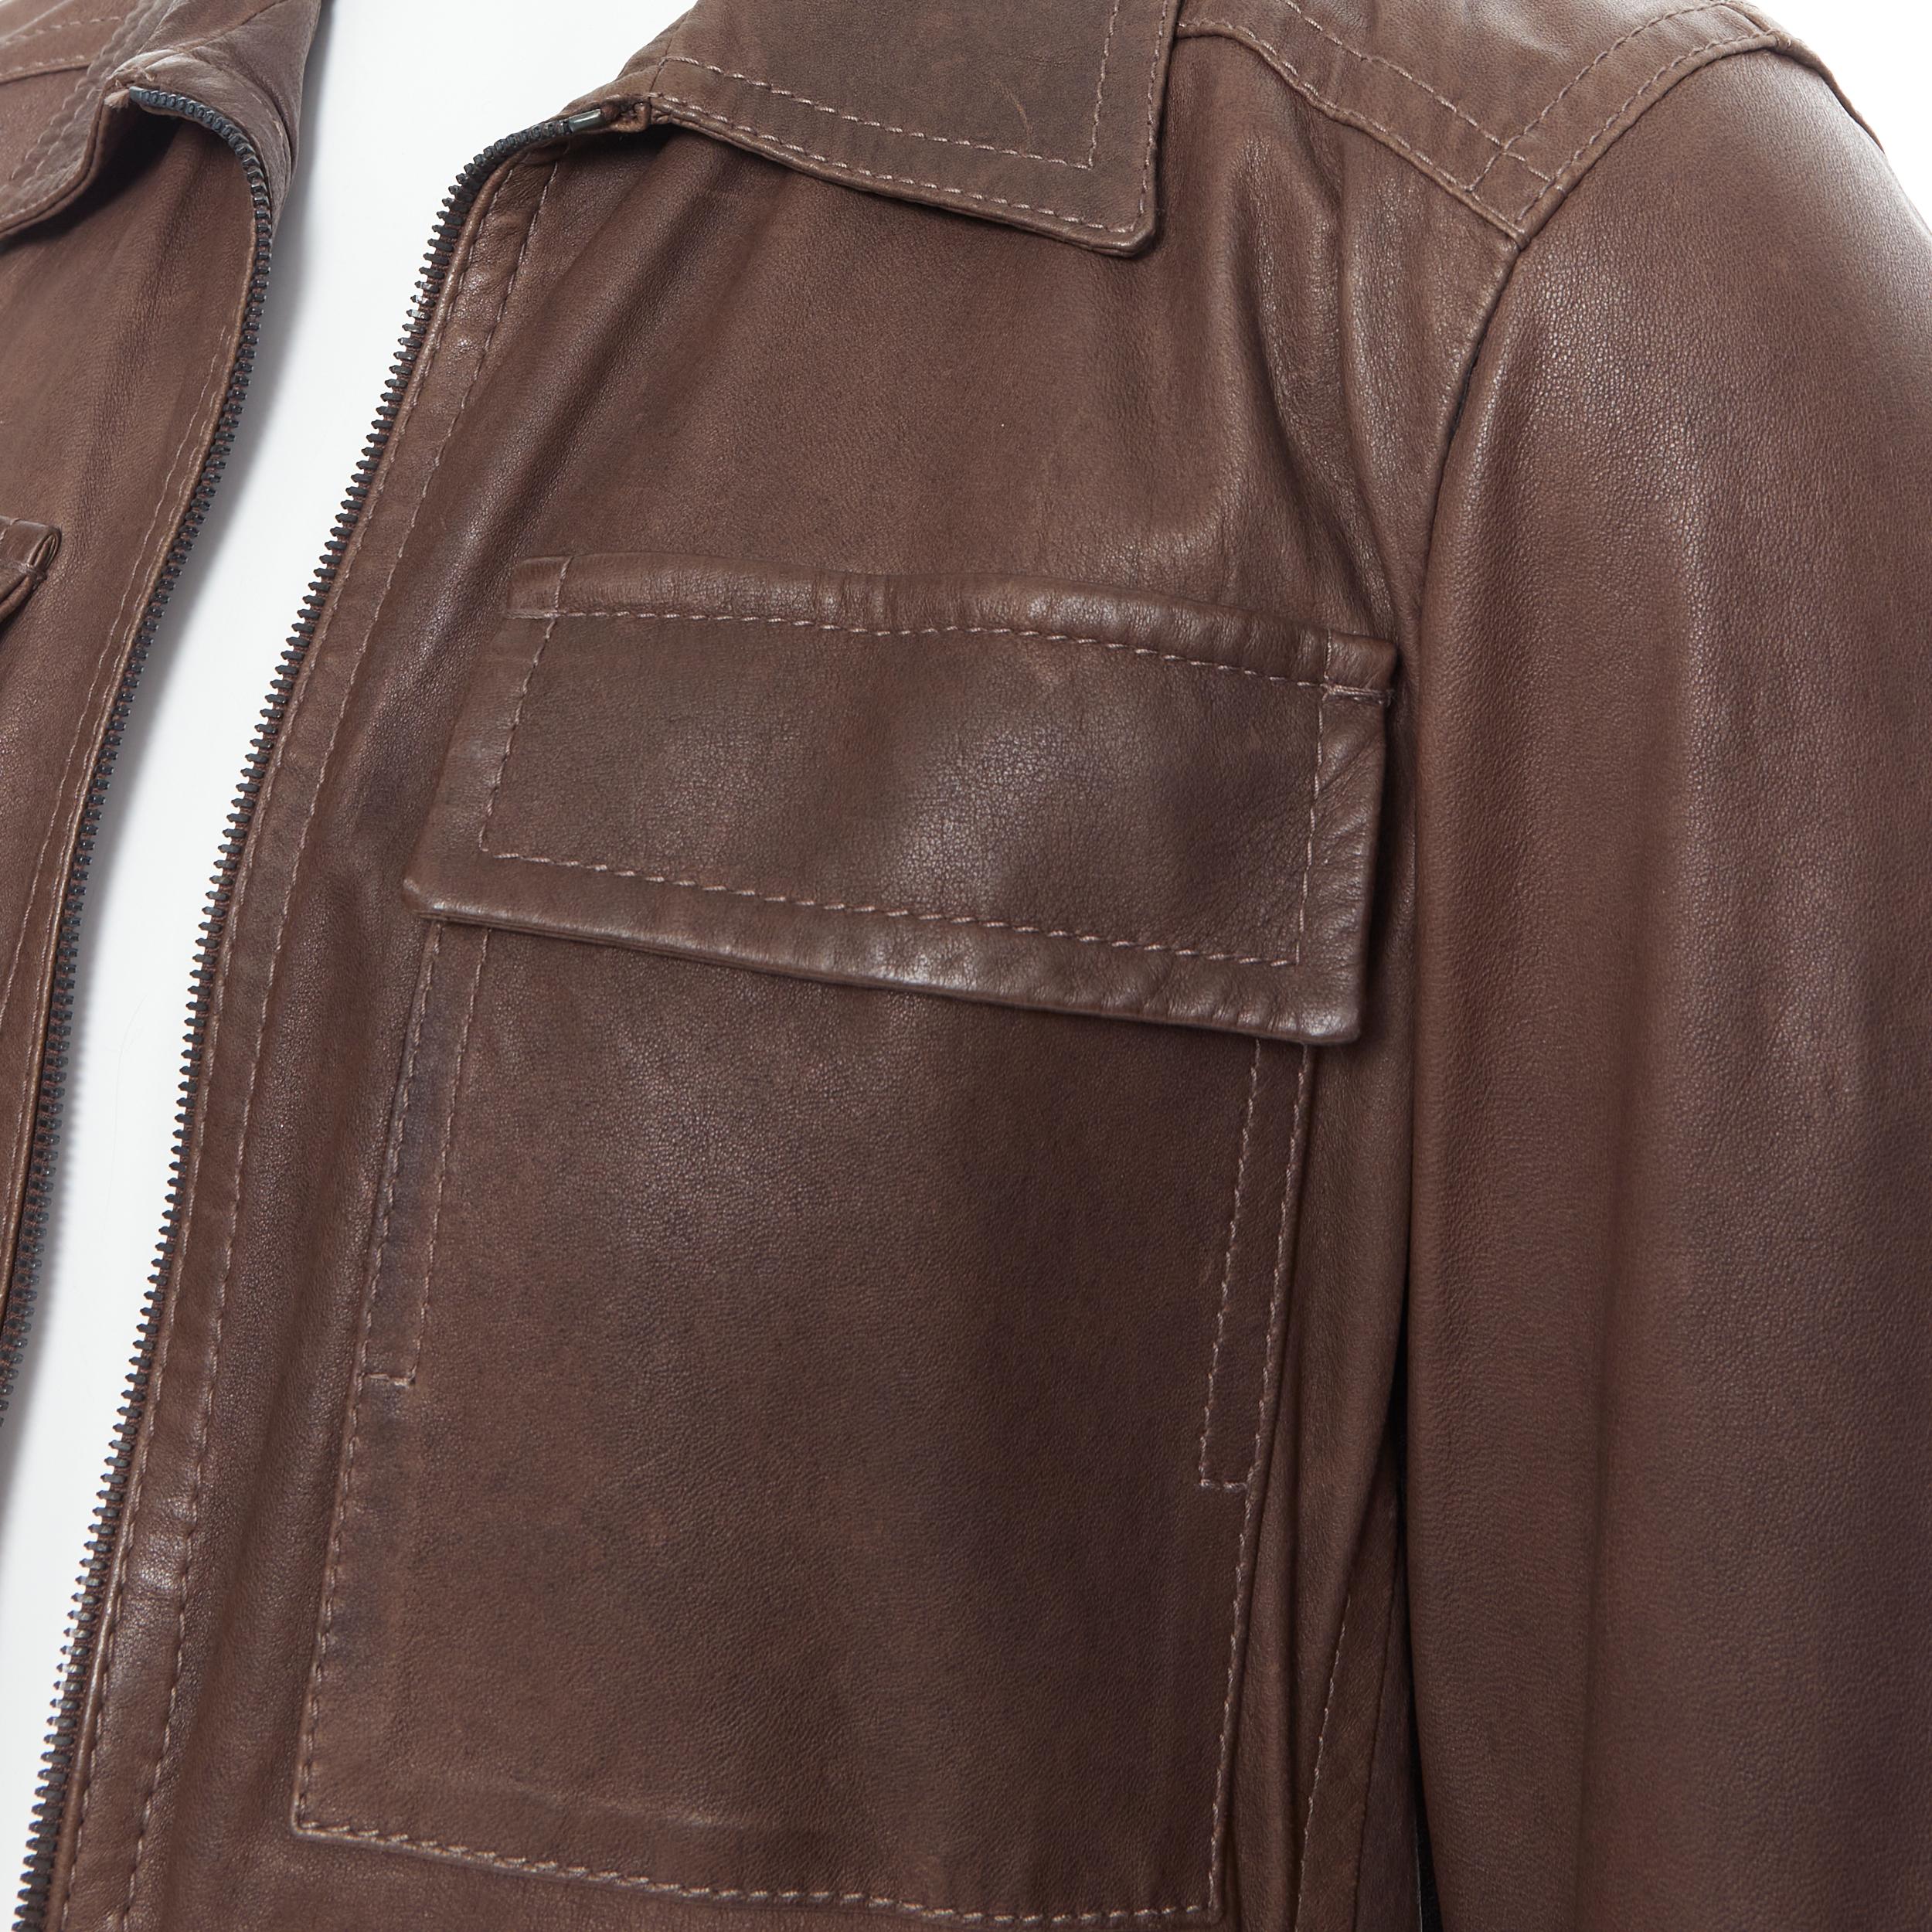 PRADA washed brown leather flap pocket collared zip flight jacket IT46 S Reference: PRCN/A00035 Brand: Prada Material: Leather Color: Brown Pattern: Solid Closure: Zip Extra Detail: Washed leather. Dual flap breast pockets. Dual zip front closure.